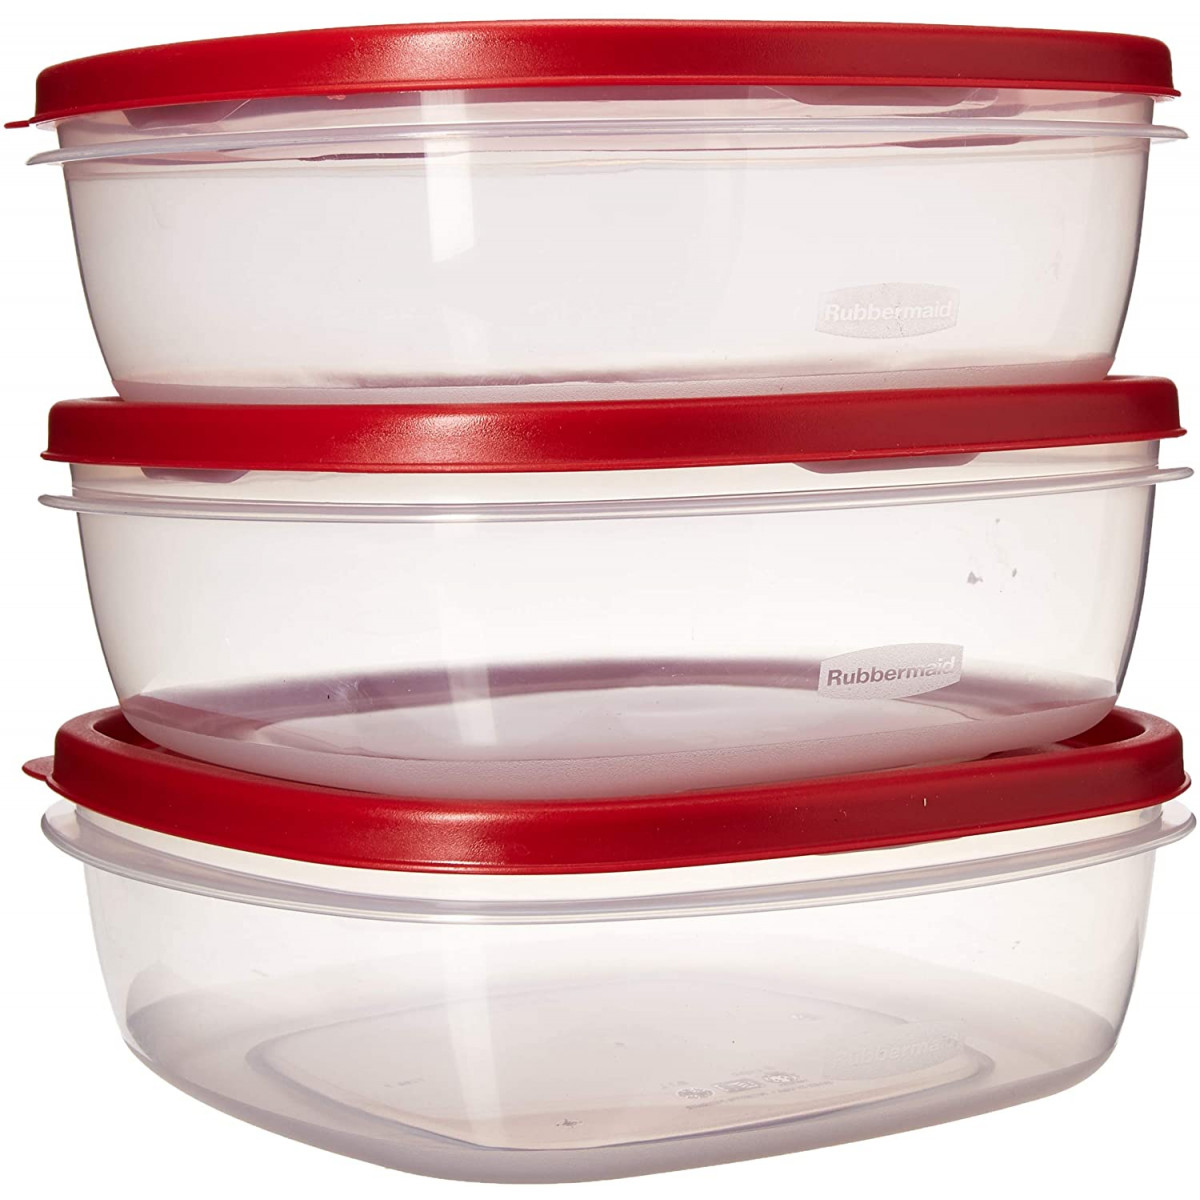 Rubbermaid 085275709247 7J71 Easy Find Lid Square 9-Cup